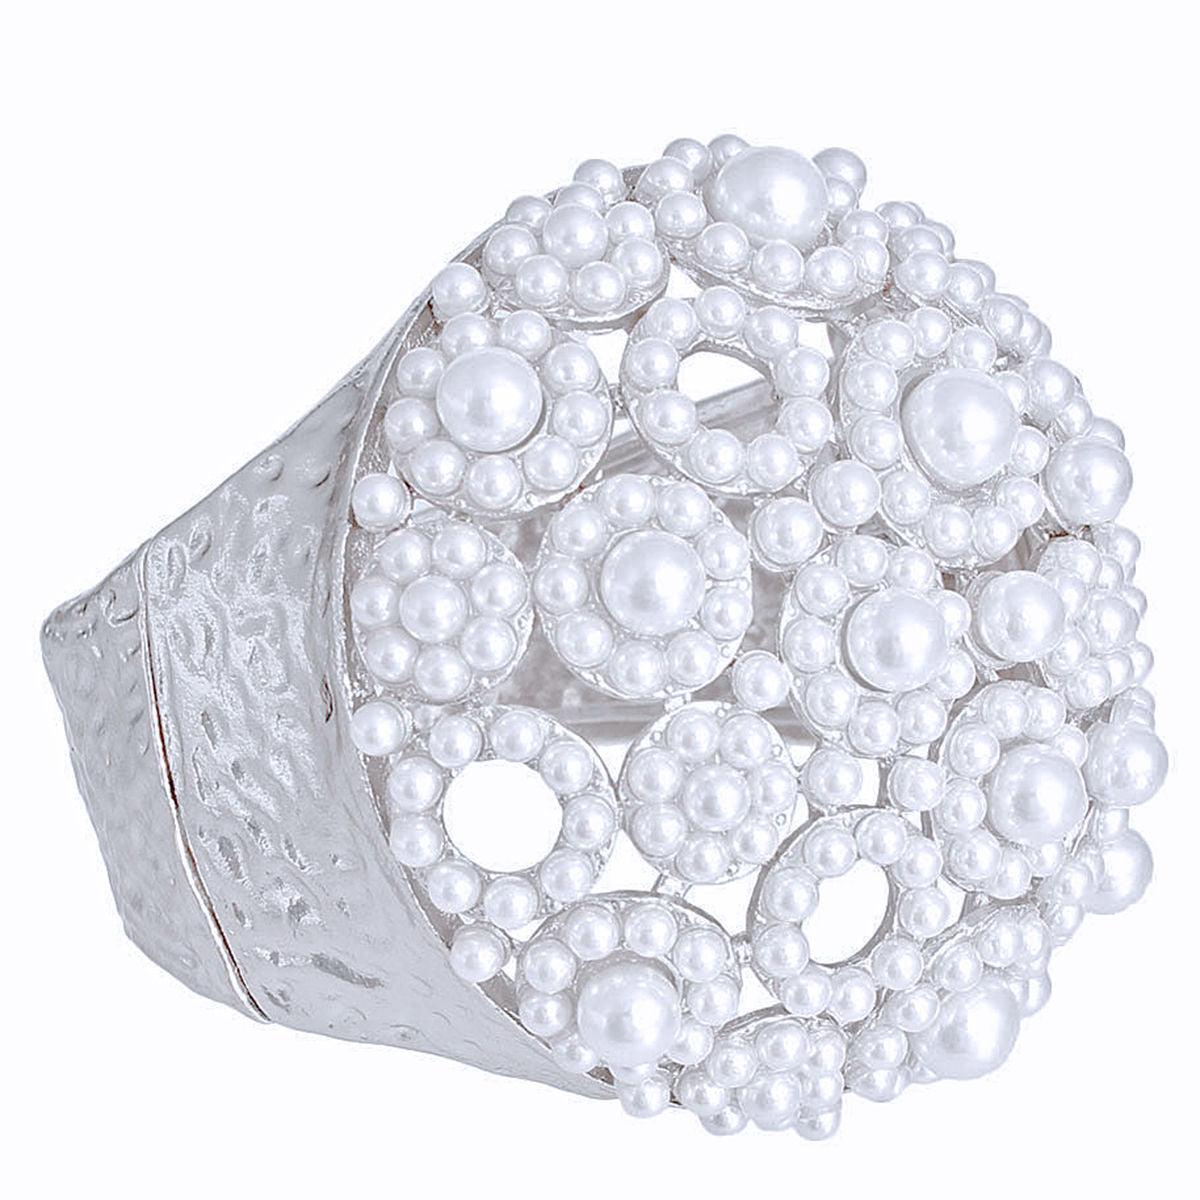 Make a Statement: Must-Have Silver & White Chunky Domed Bracelet